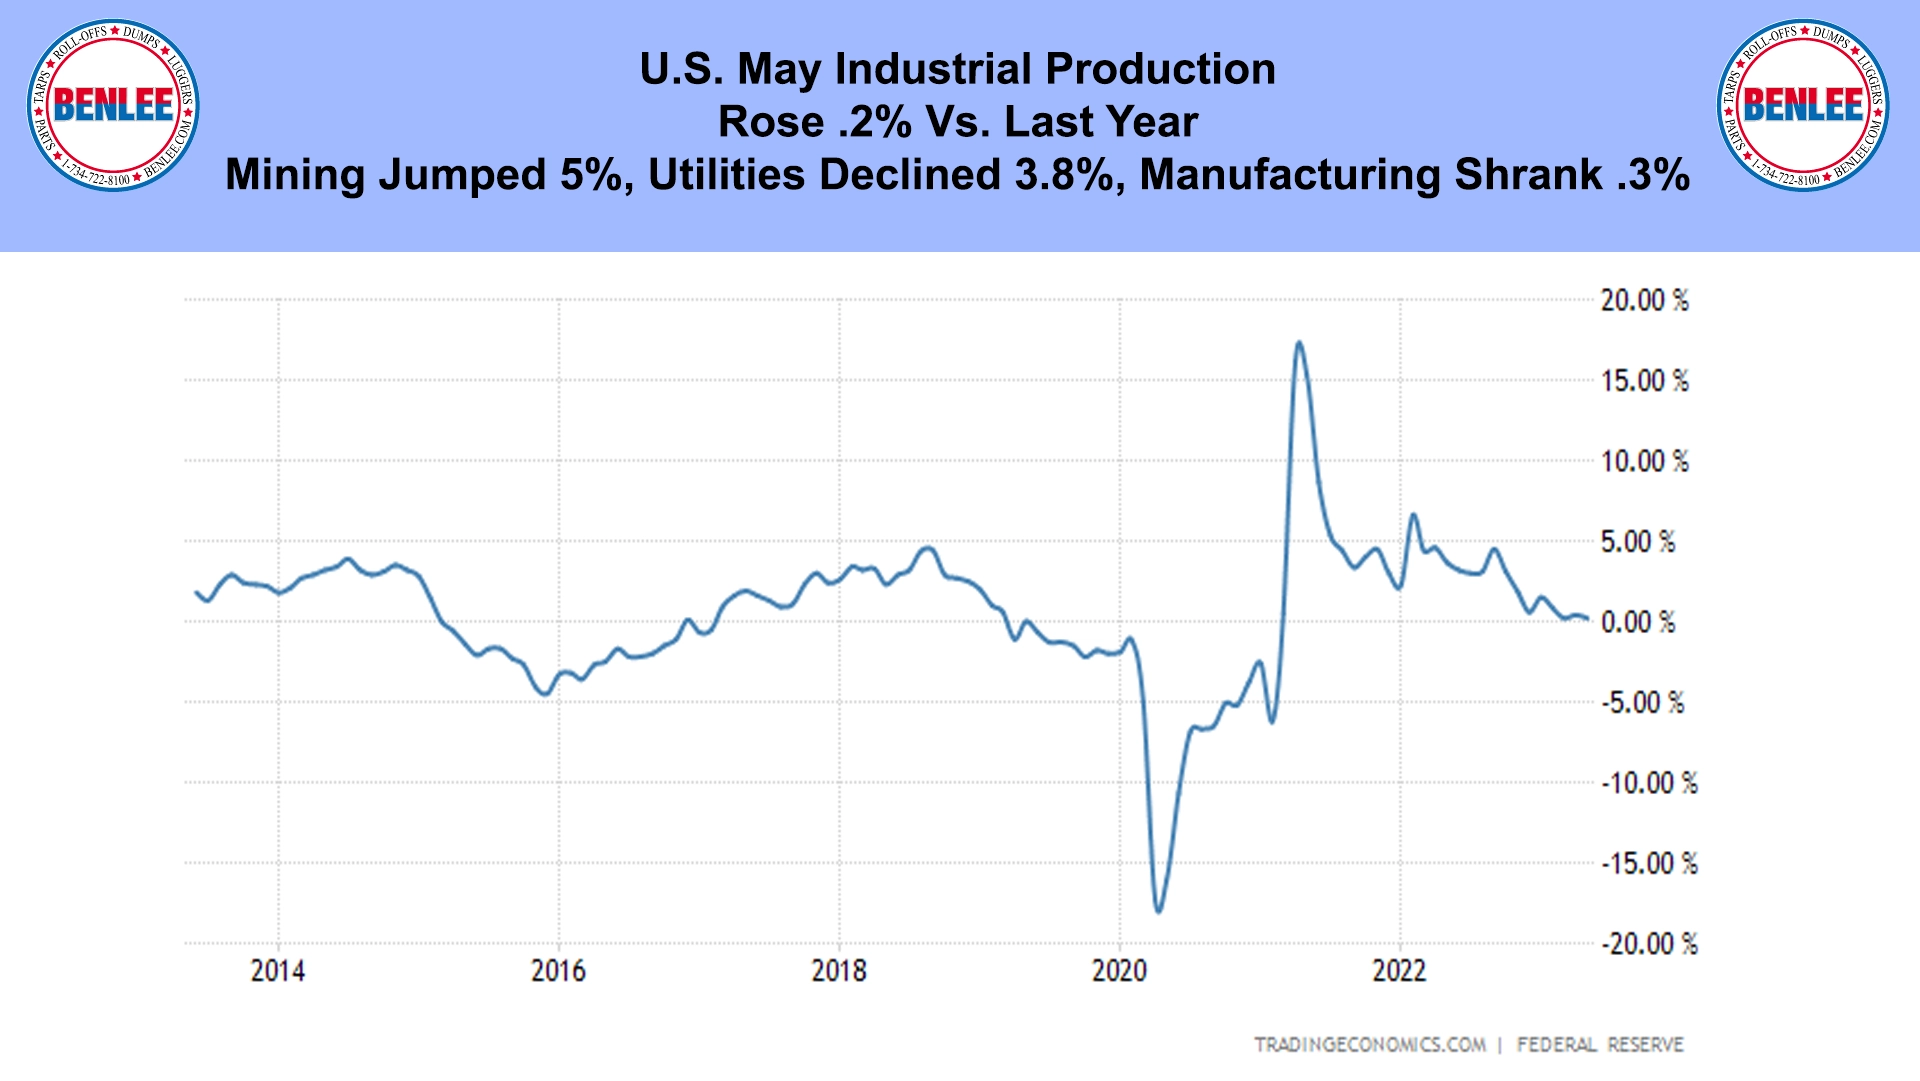 U.S. May Industrial Production